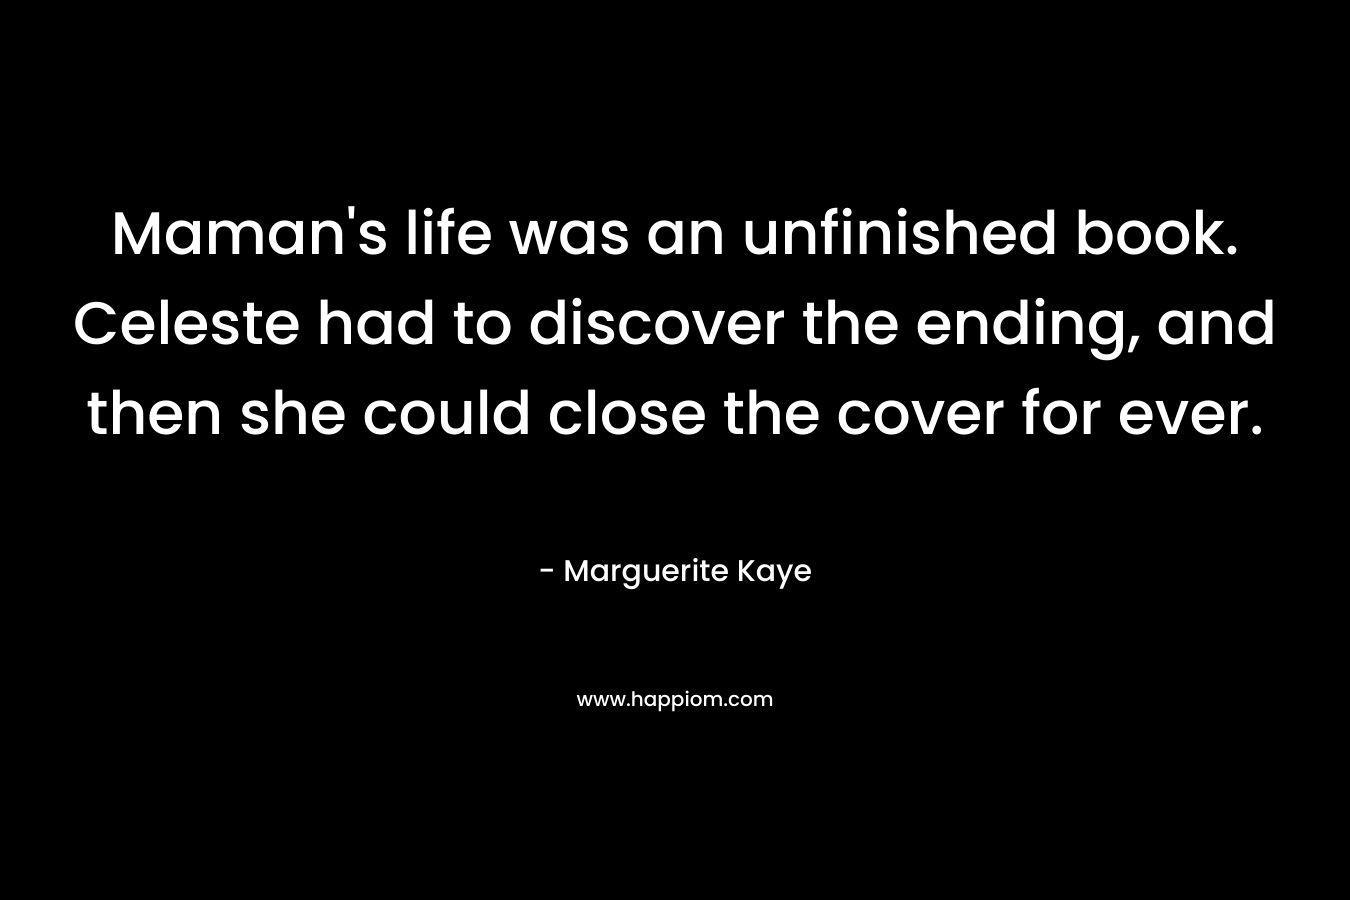 Maman’s life was an unfinished book. Celeste had to discover the ending, and then she could close the cover for ever. – Marguerite Kaye